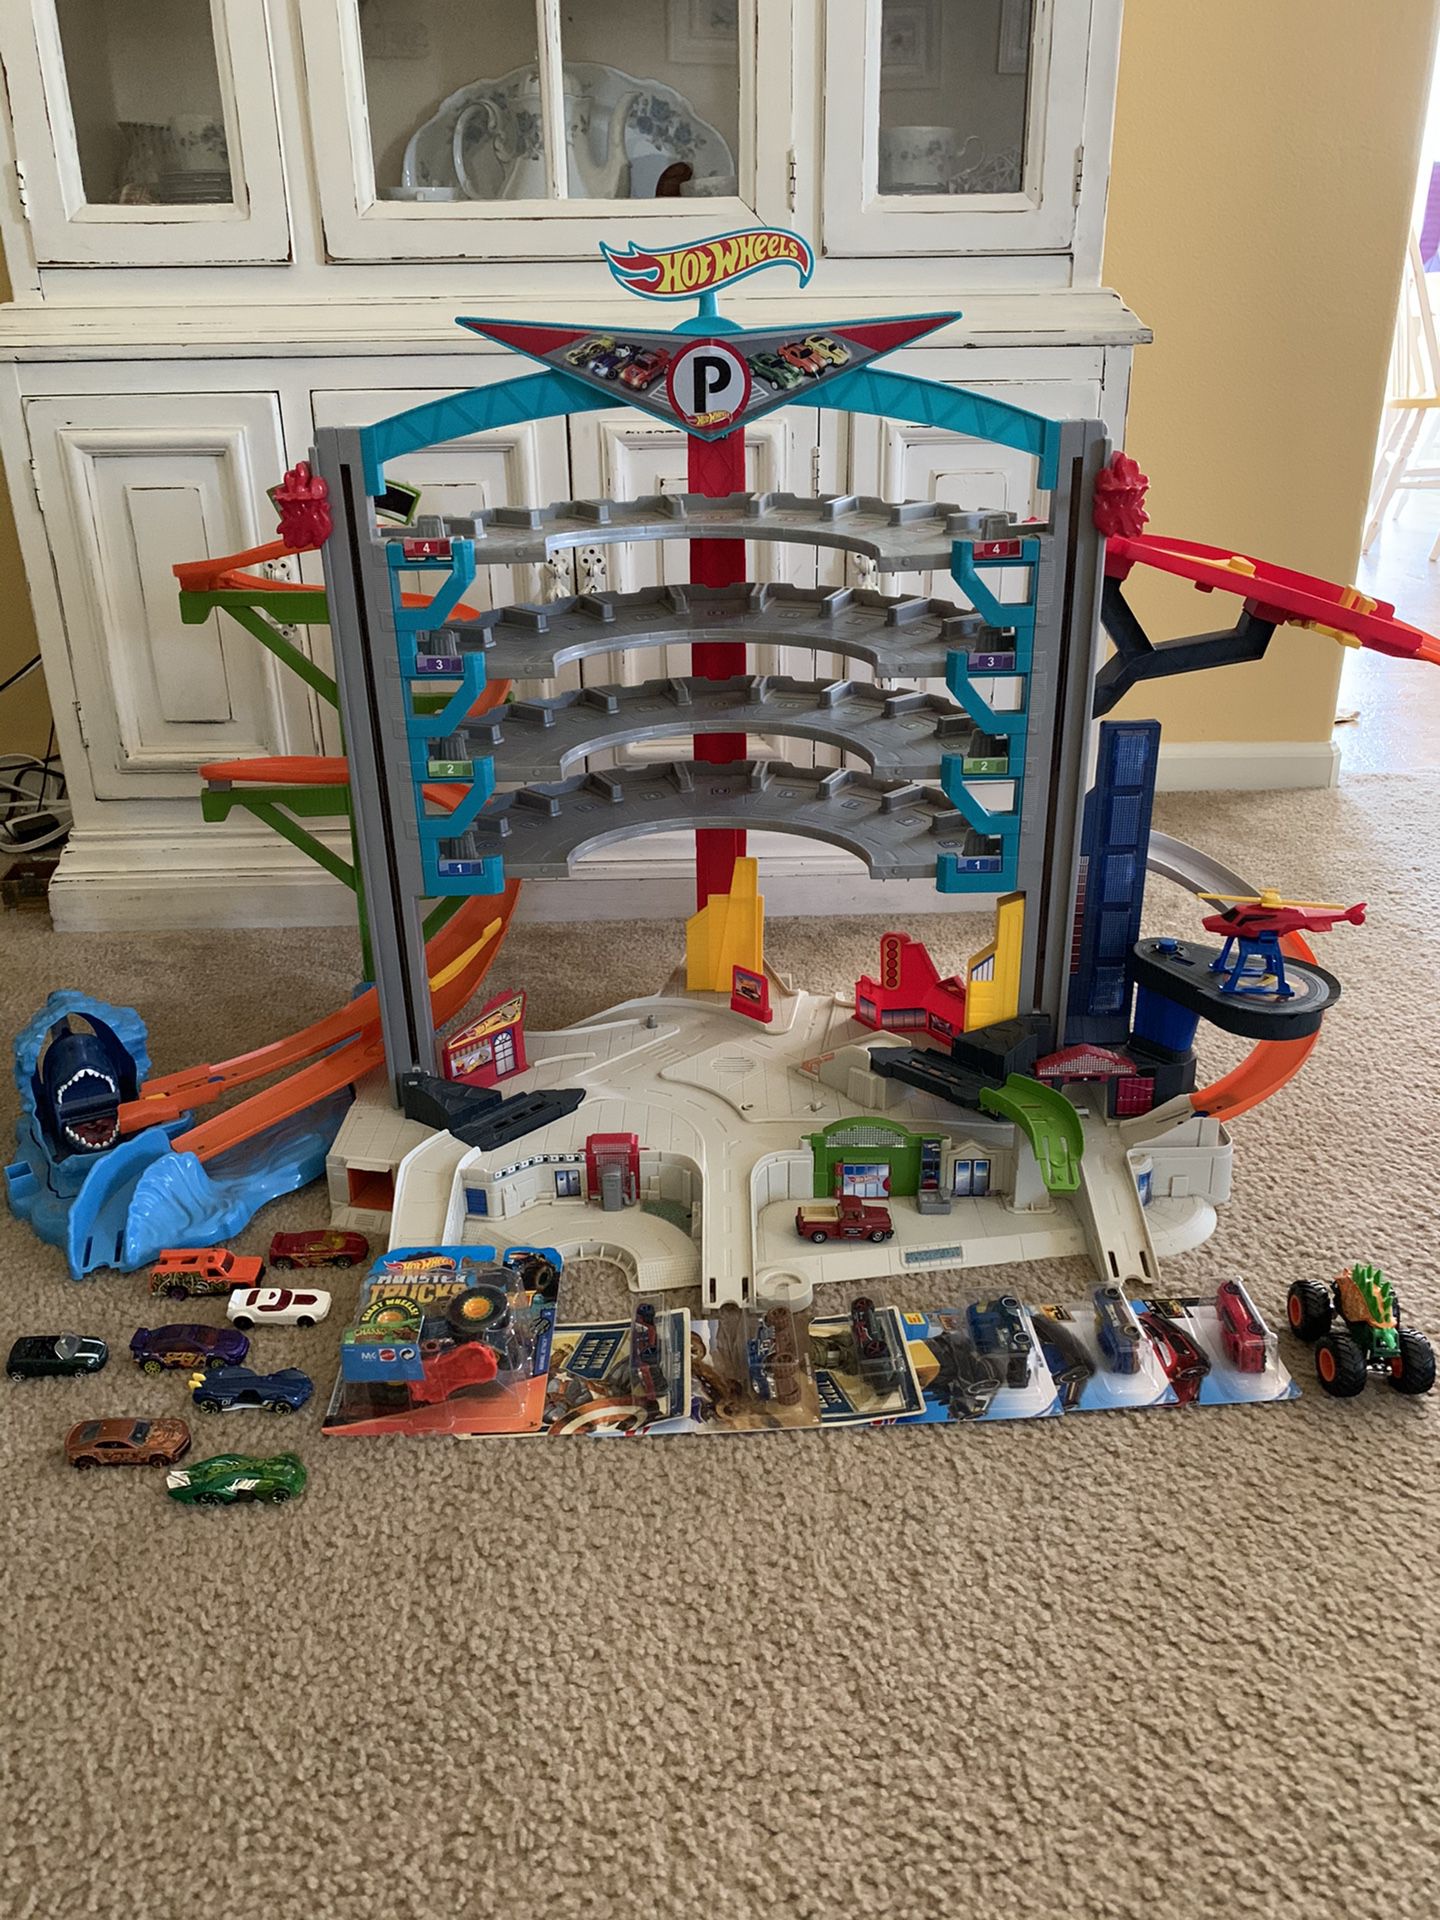 Hot Wheels Garage with cars